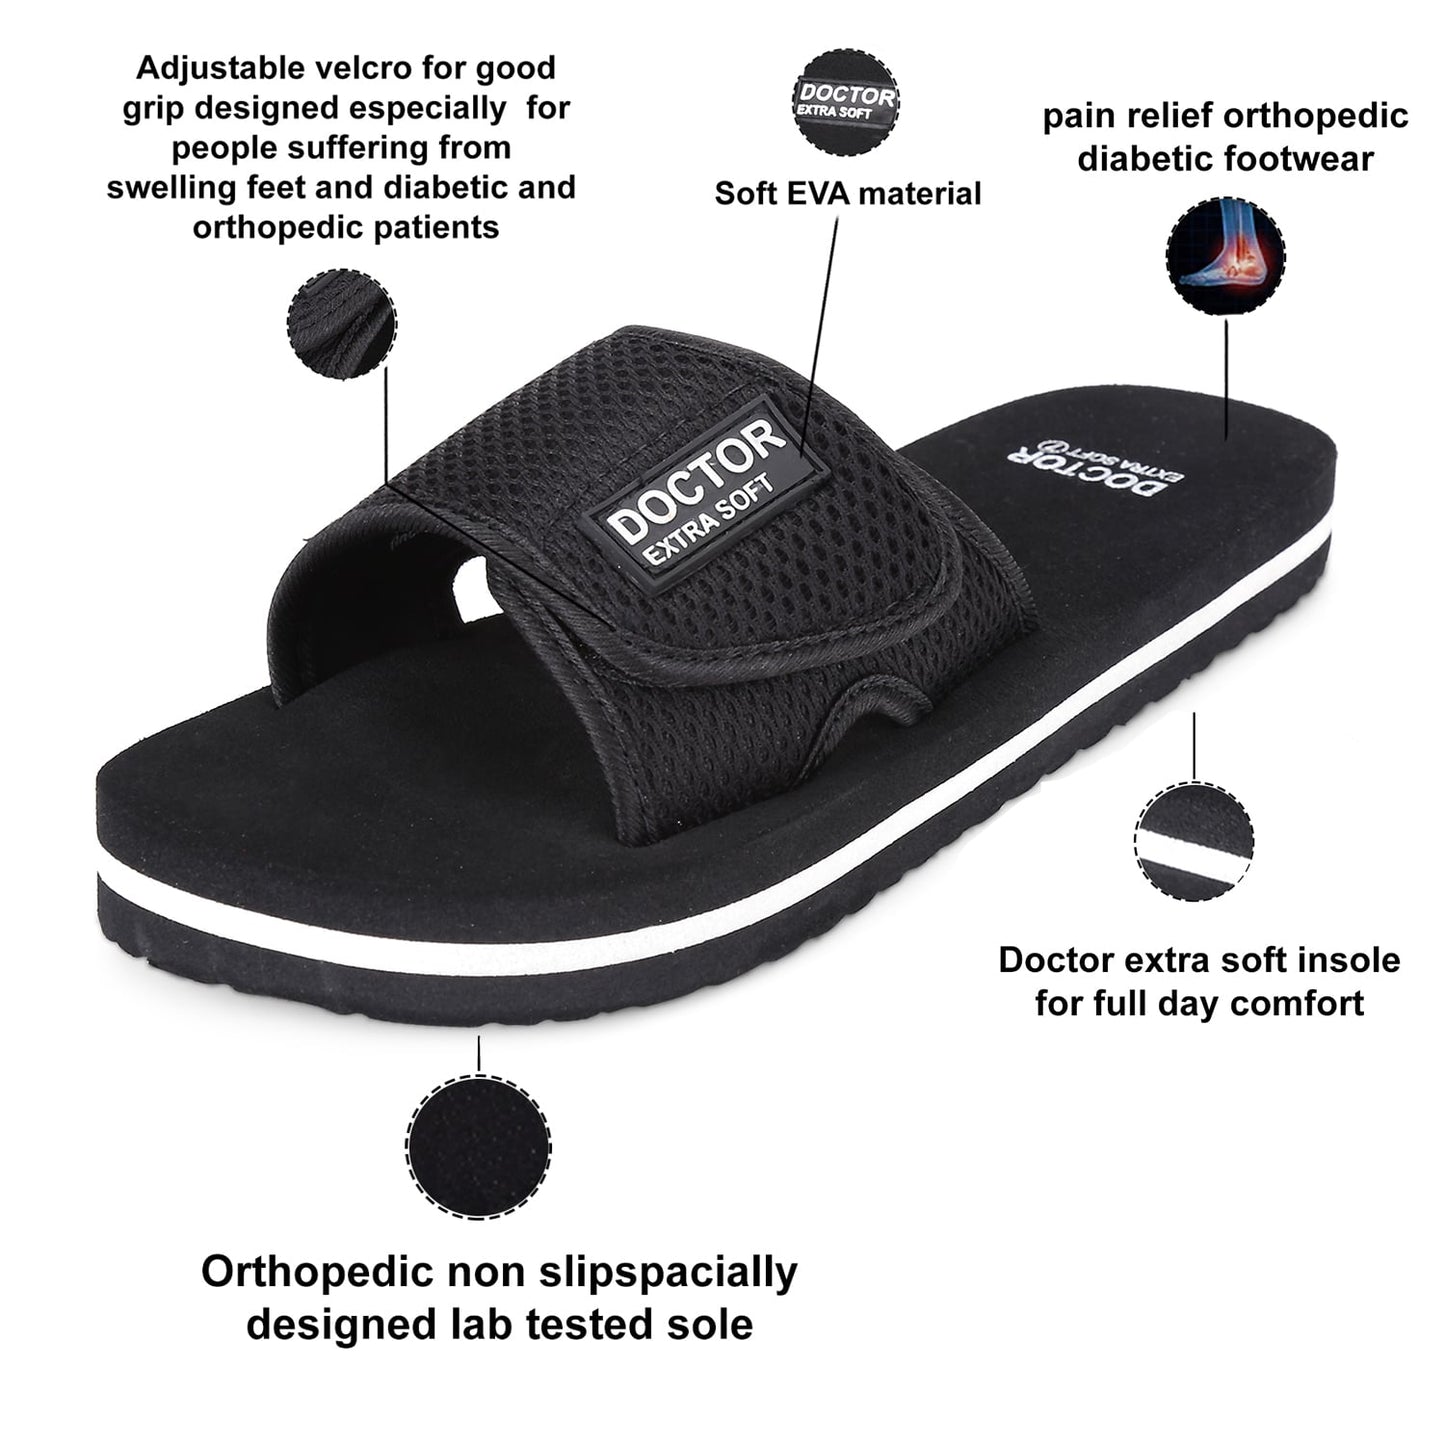 DOCTOR EXTRA SOFT D-25 Men's Dr Slippers/Sliders, Avoids Blisters, Scars, Sweating & Pain